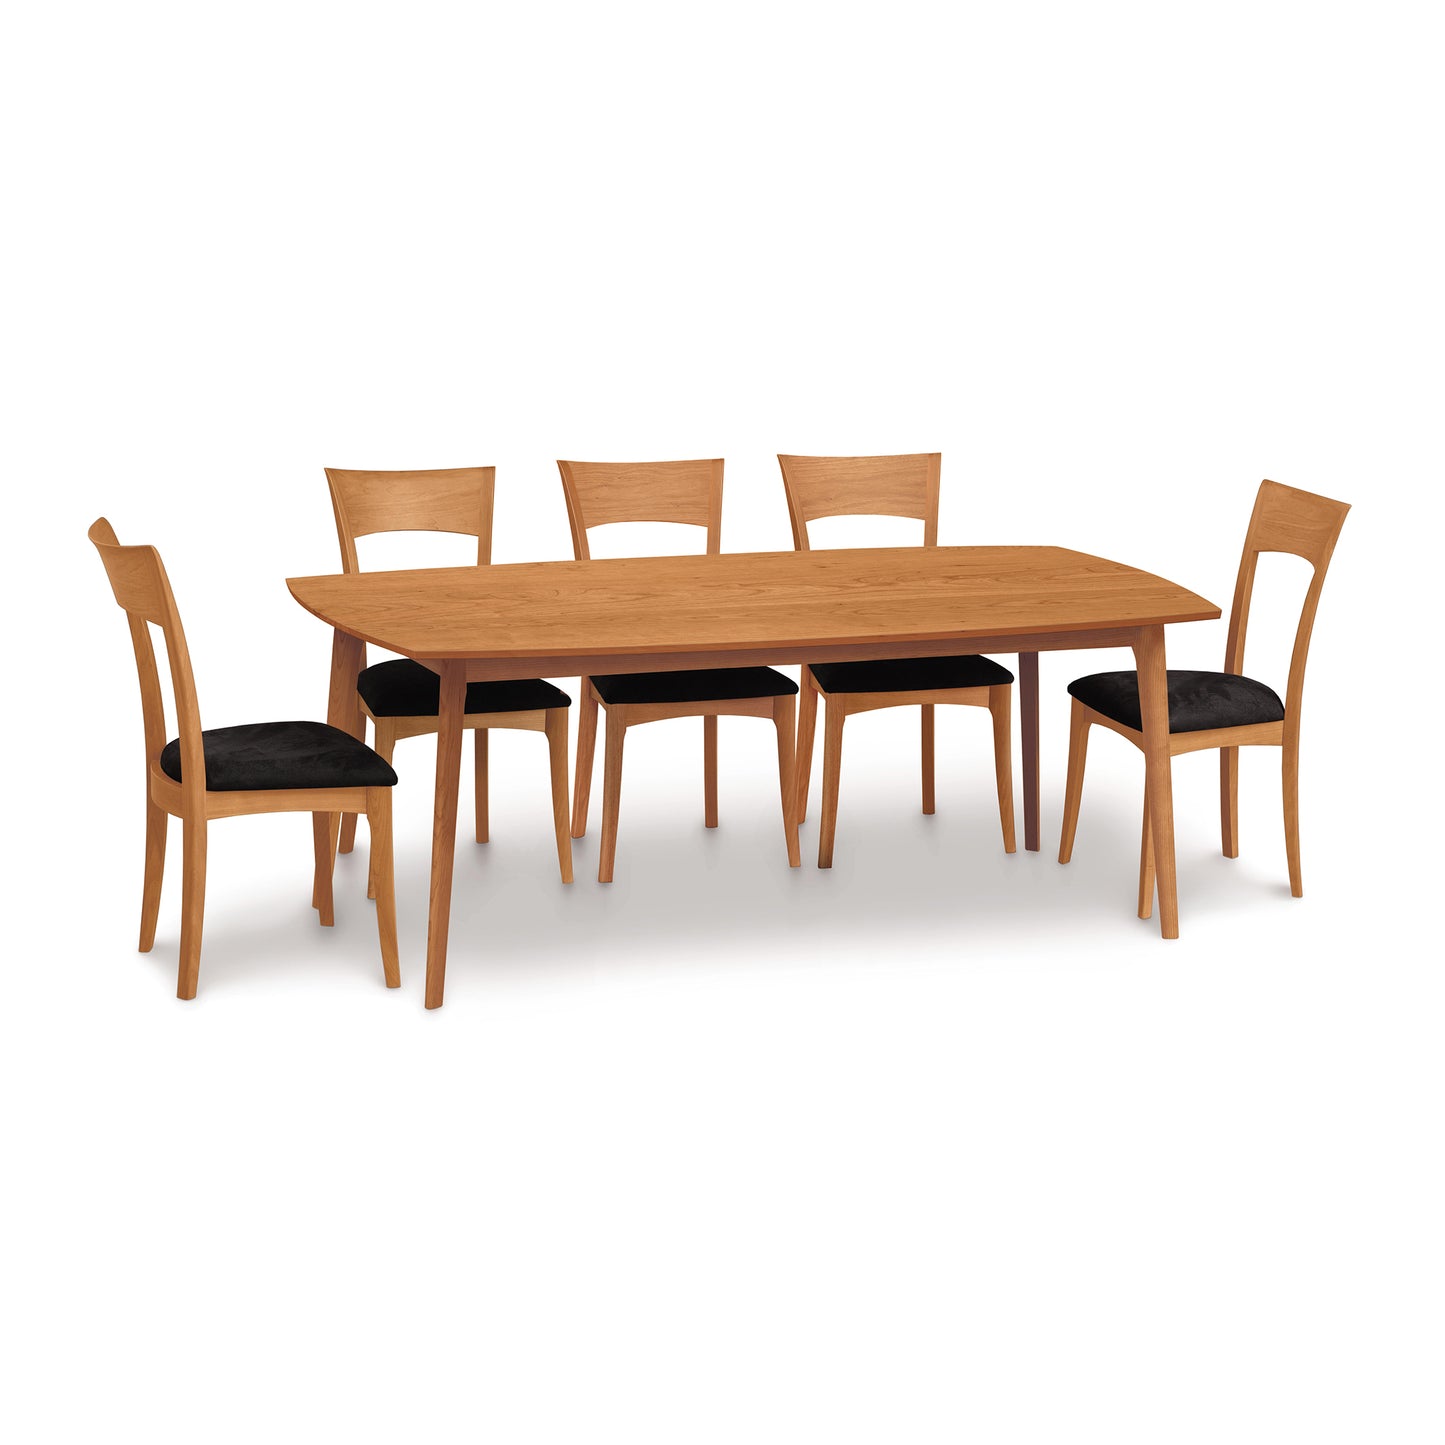 A Catalina Solid-Top Table dining set with six chairs on a white background, crafted from sustainably-sourced hardwoods by Copeland Furniture.